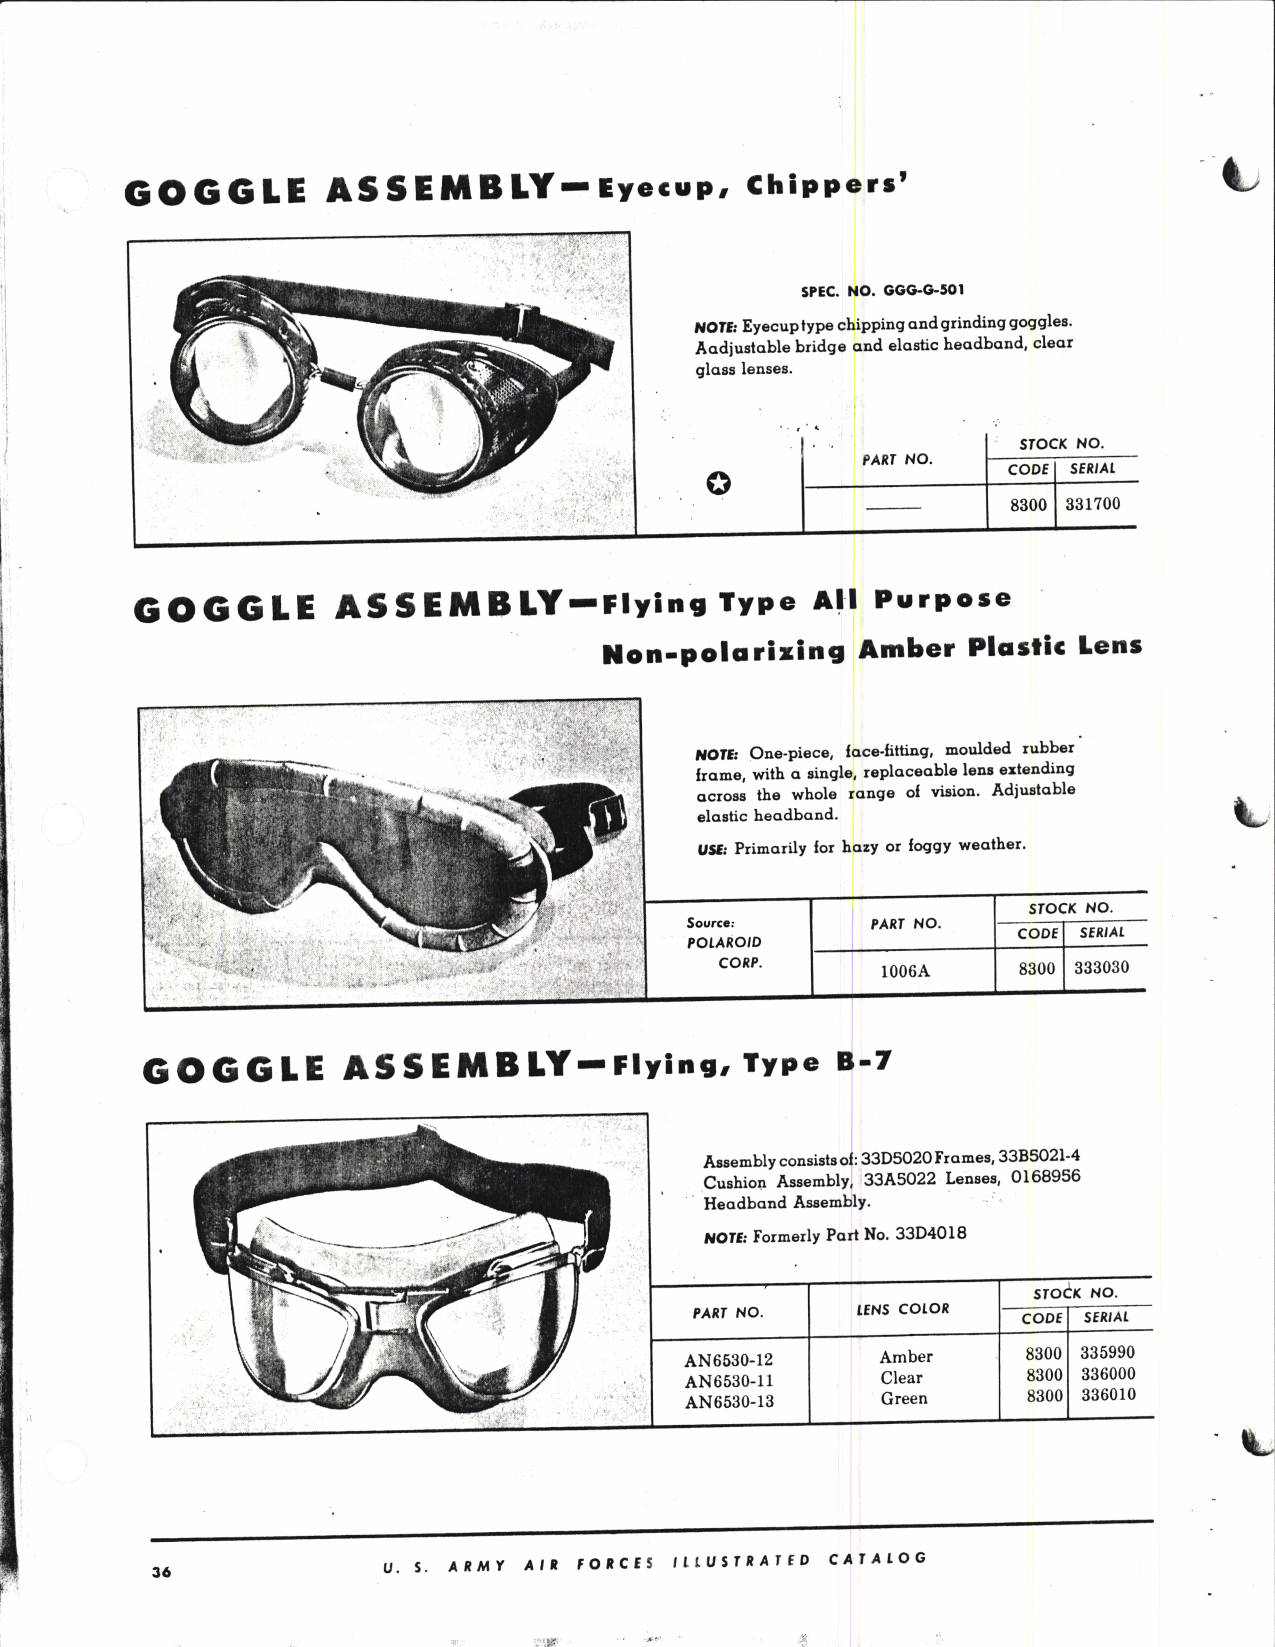 Sample page 54 from AirCorps Library document: Illustrated Catalog for Clothing, Parachutes, Equipment and Supplies Class 13